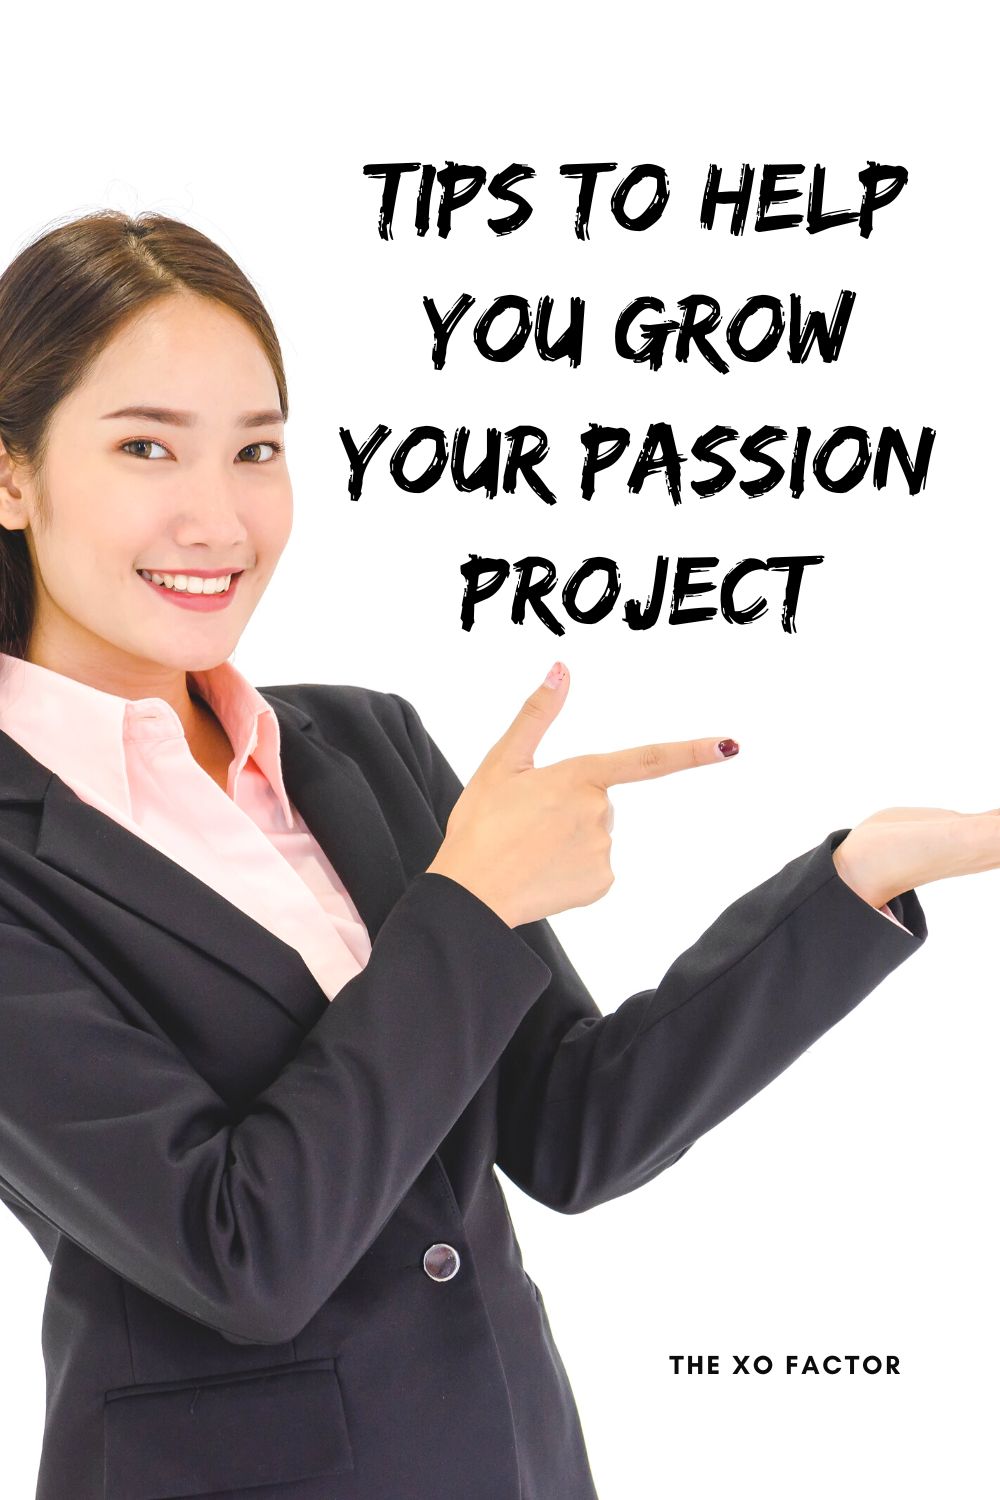 3 tips to grow your passion project